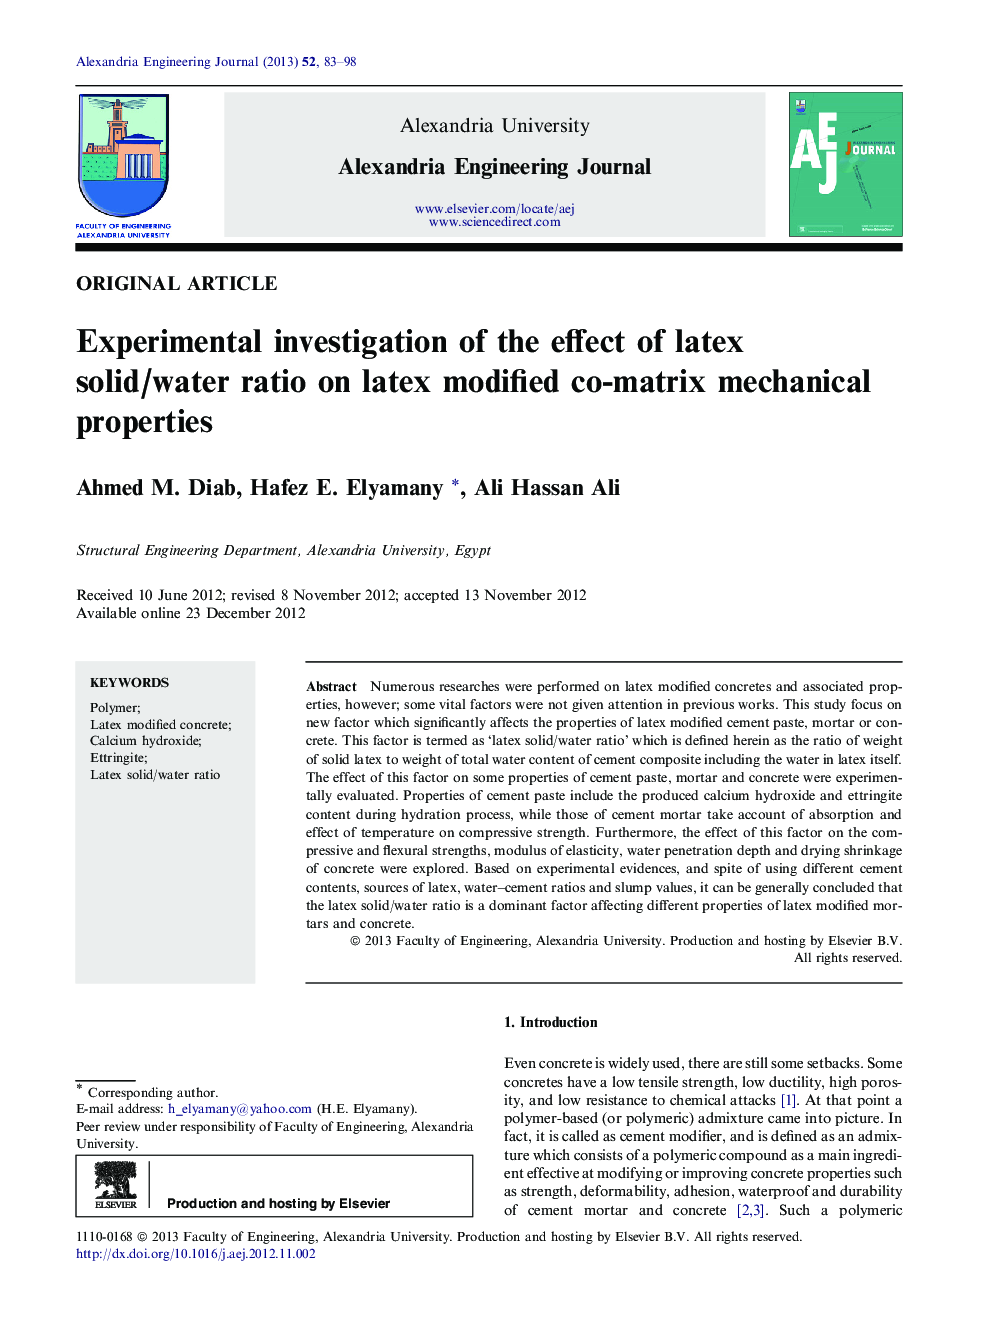 Experimental investigation of the effect of latex solid/water ratio on latex modified co-matrix mechanical properties 